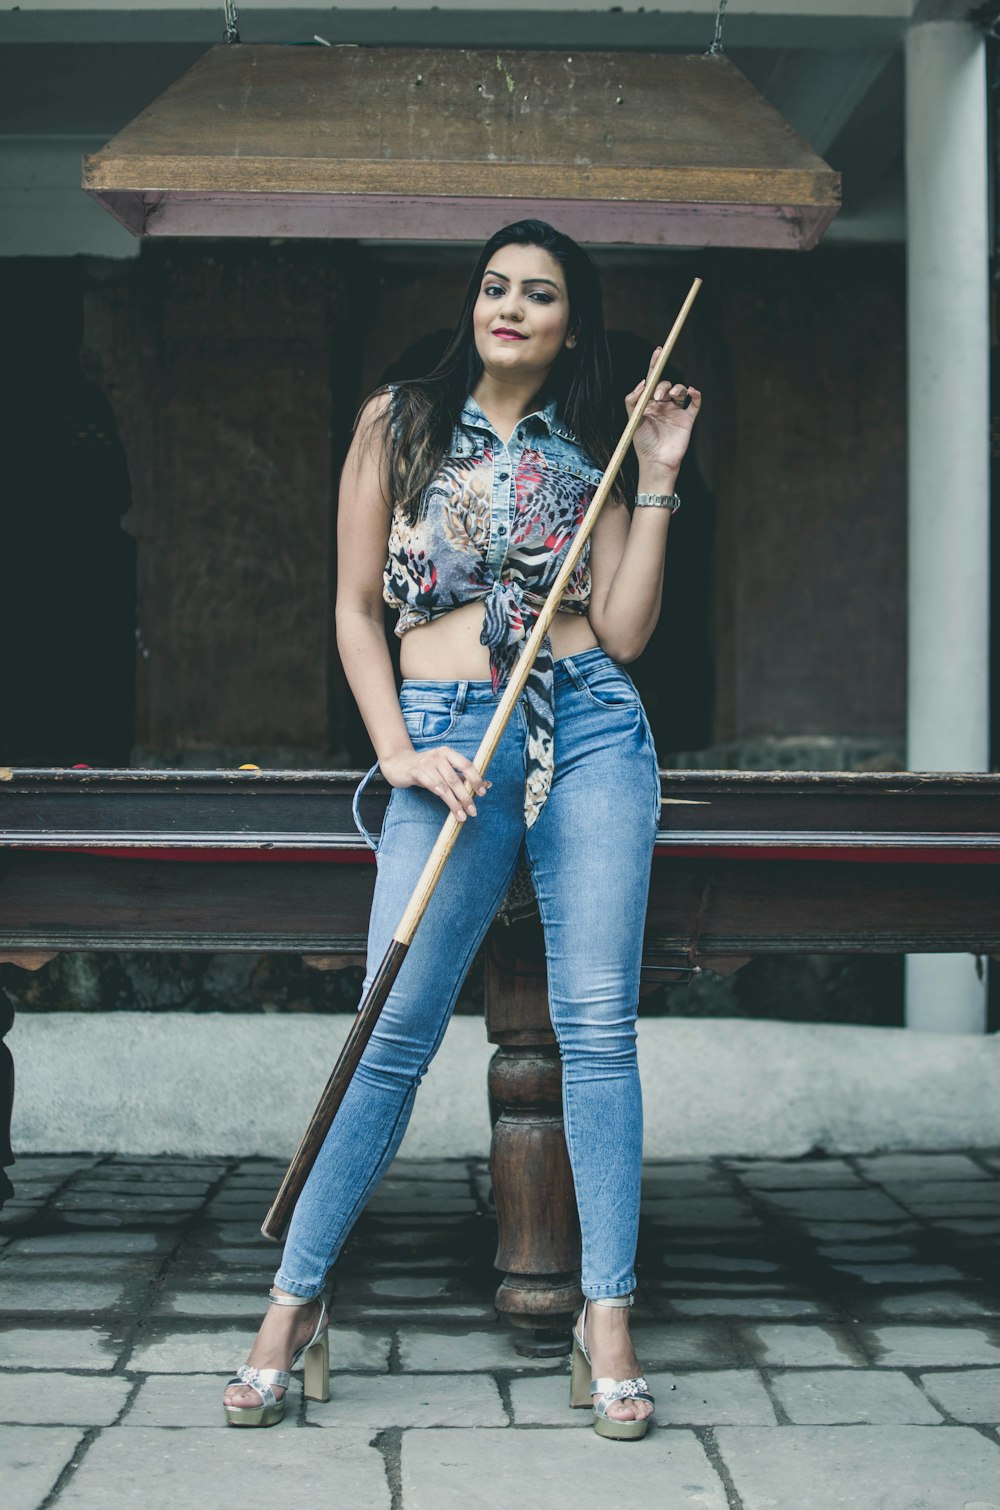 woman in white and red floral shirt and blue denim jeans holding brown wooden stick